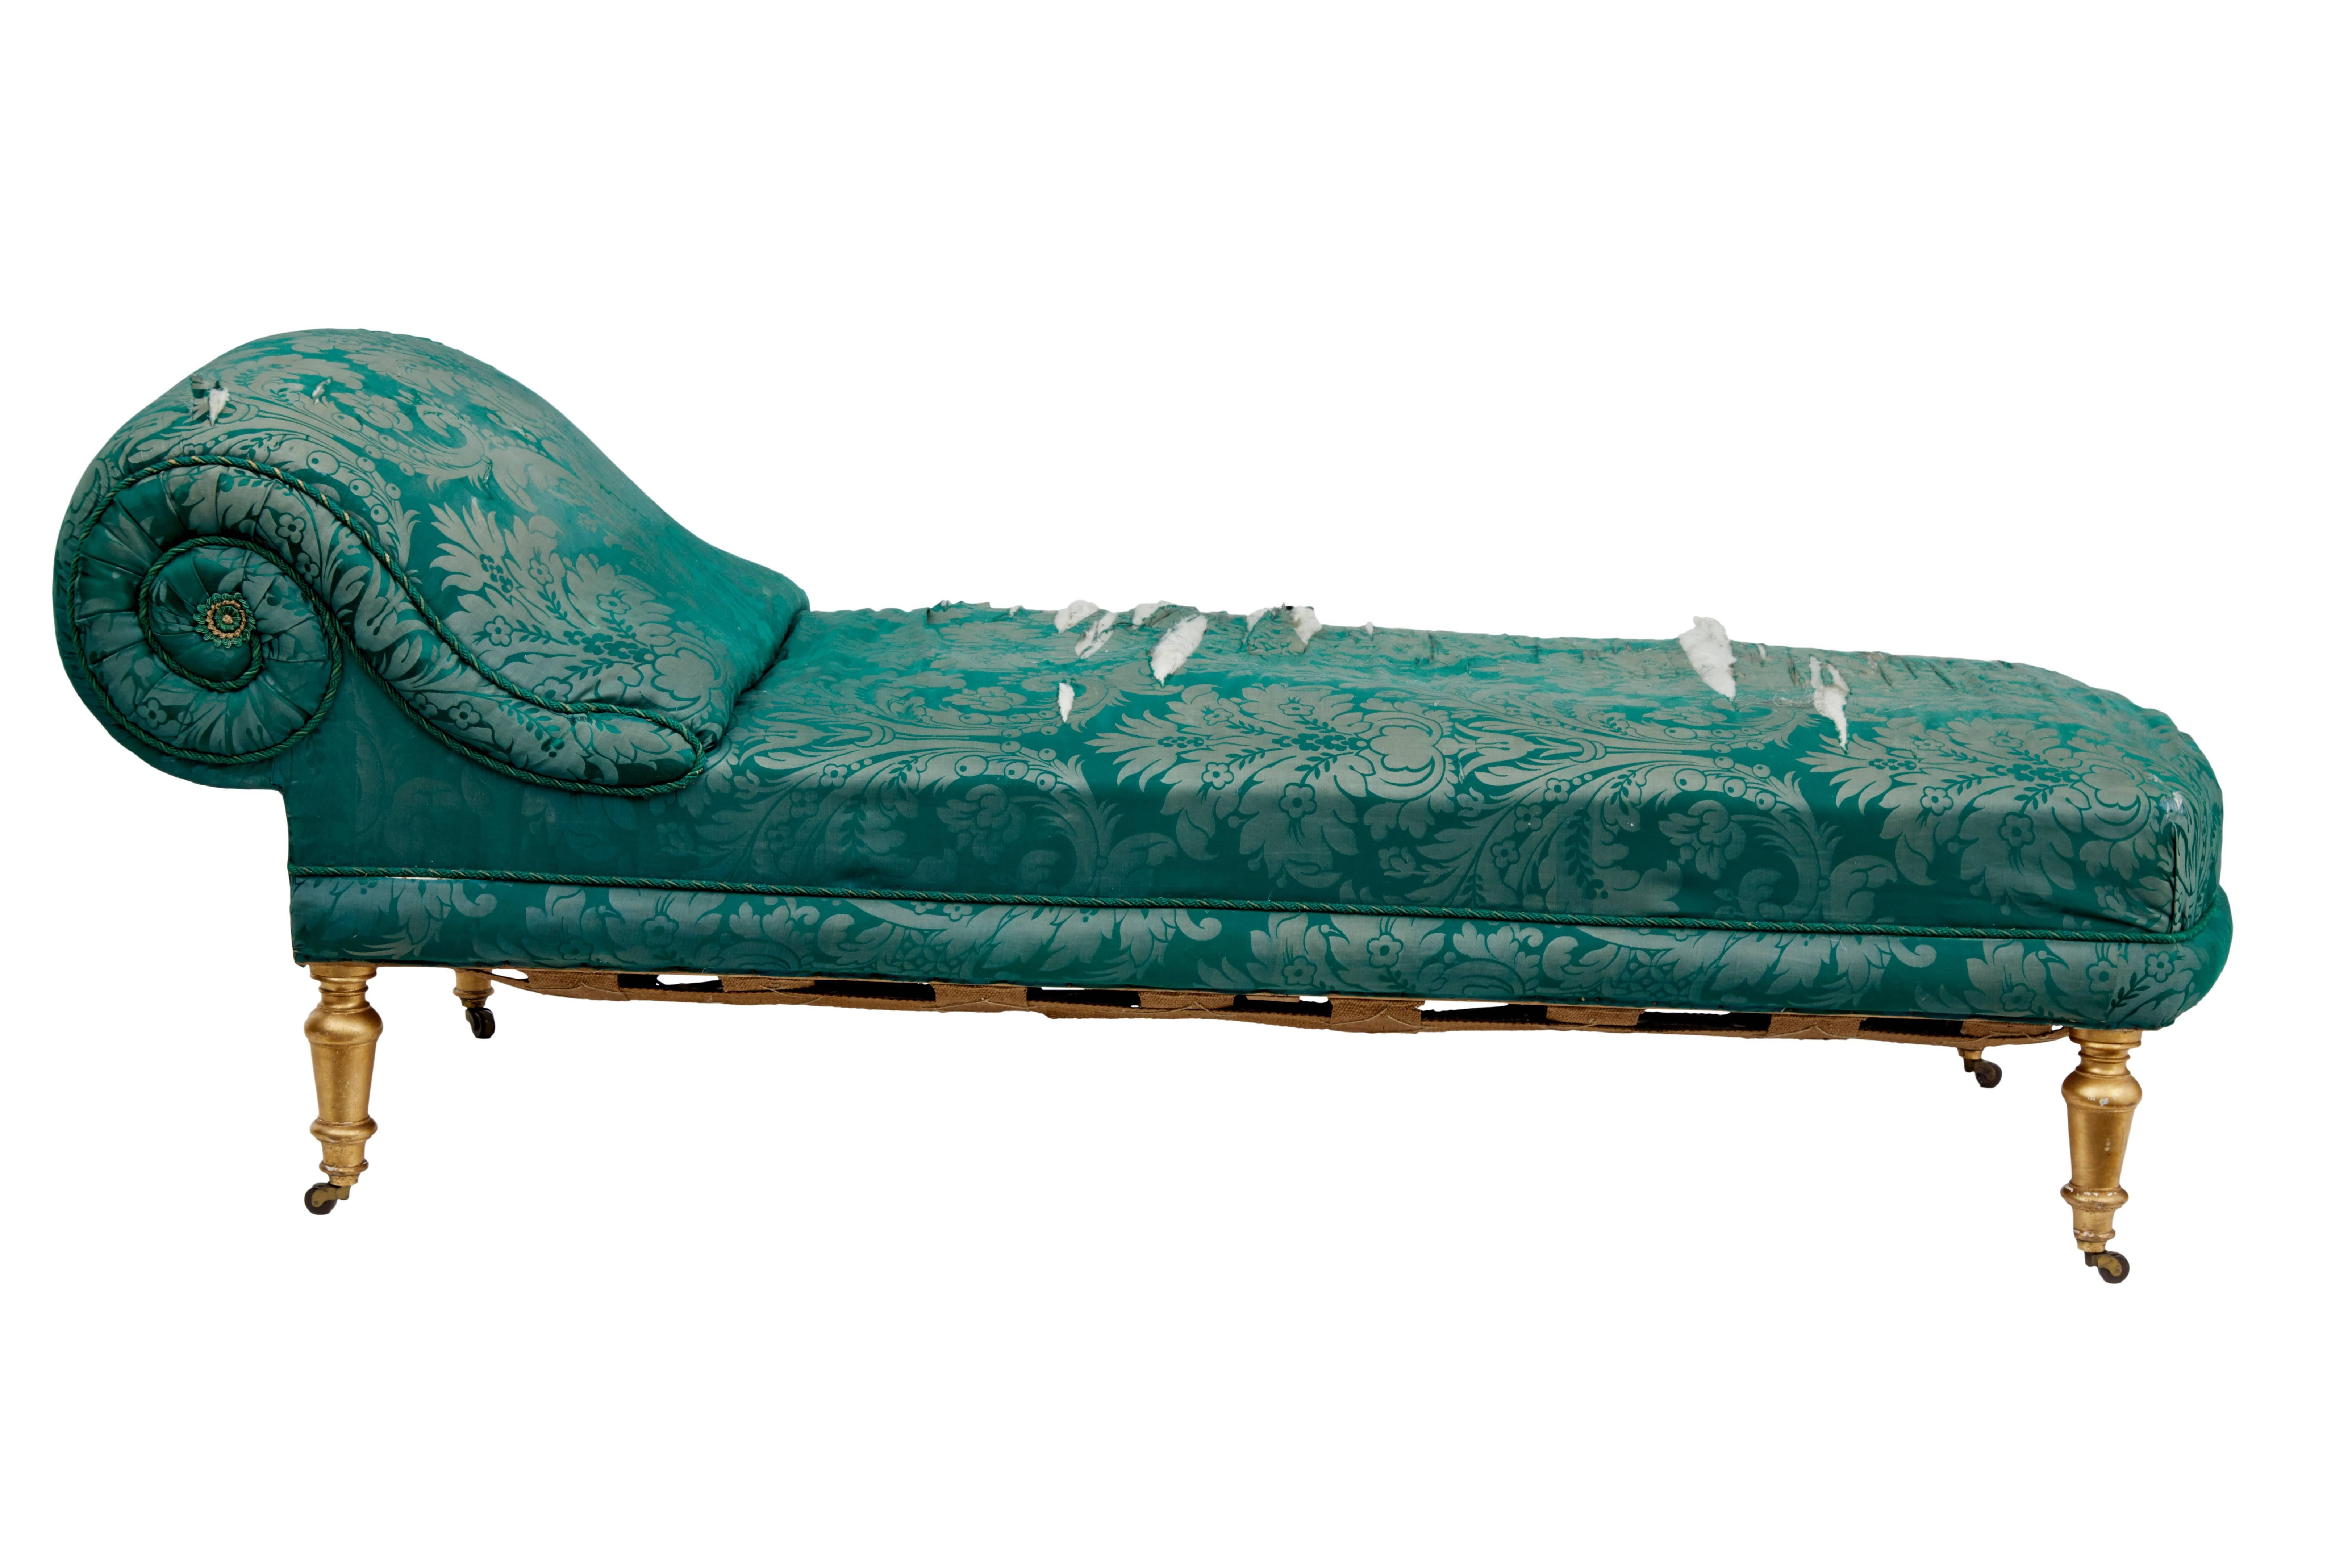 Here we have a fine elegant daybed, circa 1870.

This piece was part of the Swedish royal collection before it was released for sale in 1992. (Dates and stamps photographed)
Although the fabric is in much need of replacement, it still illustrates